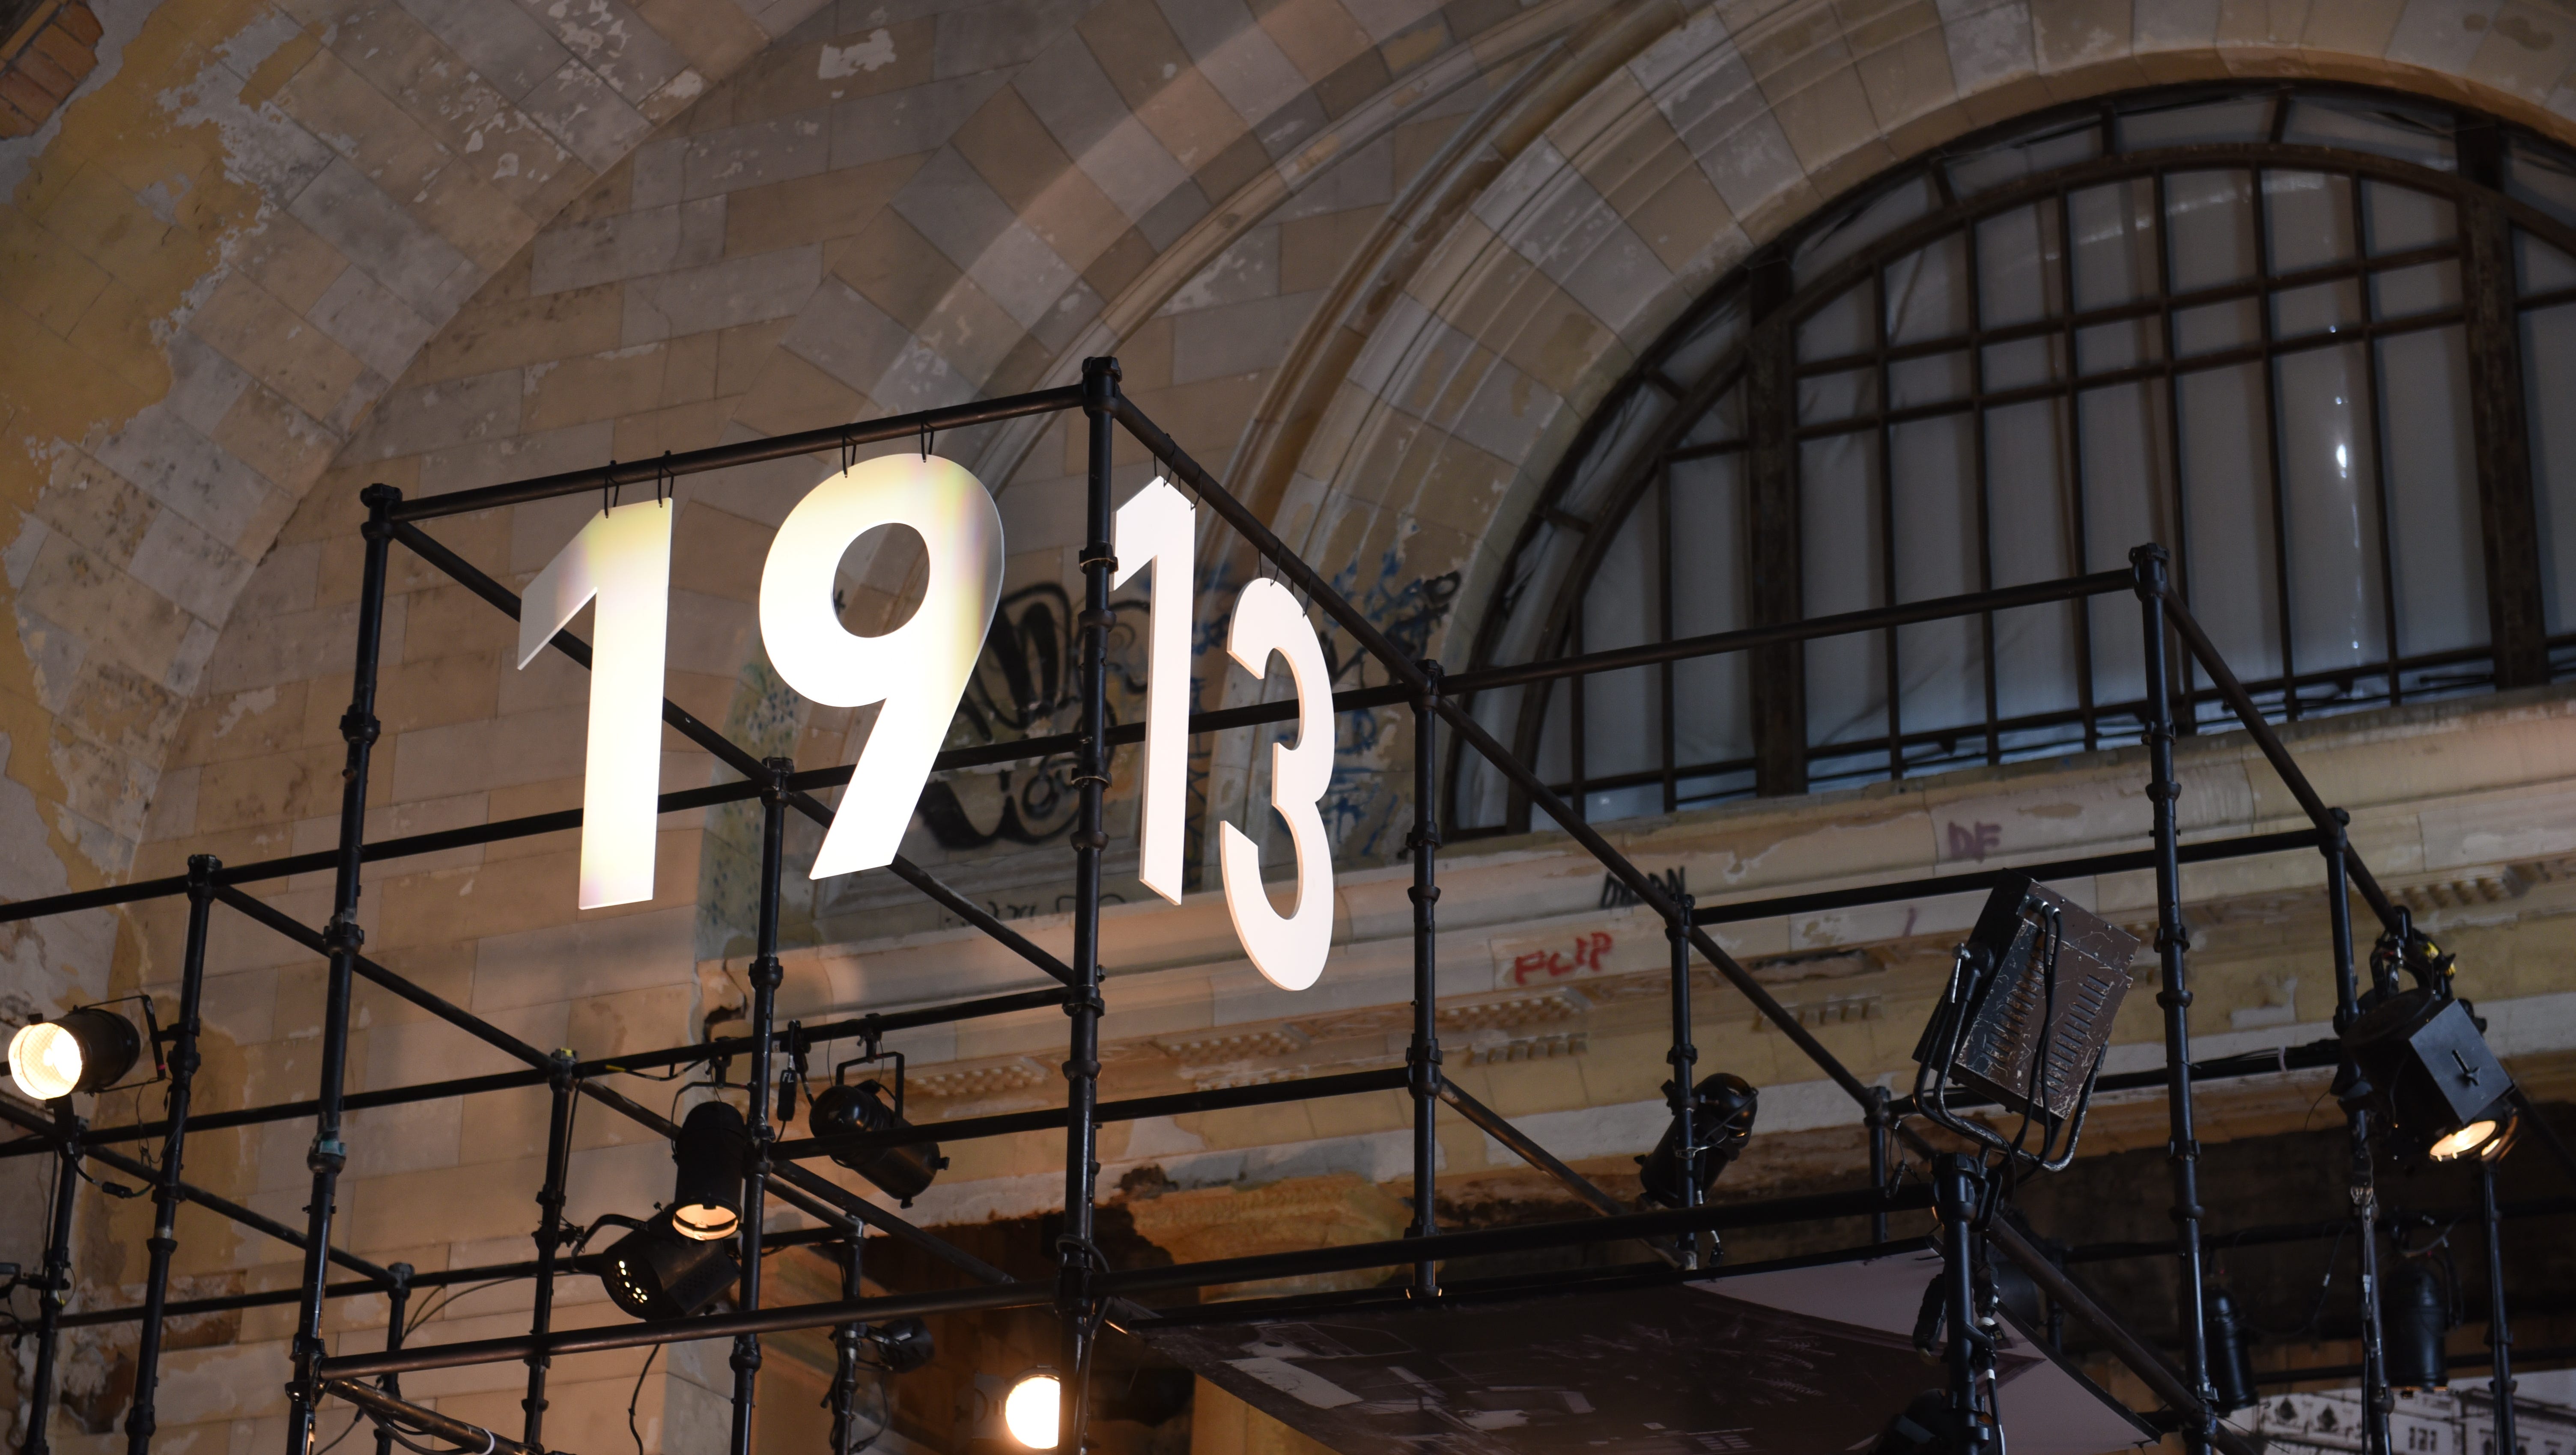 1913, the year of the station's opening, is displayed during tours Friday of the famed Michigan Central Train Depot.